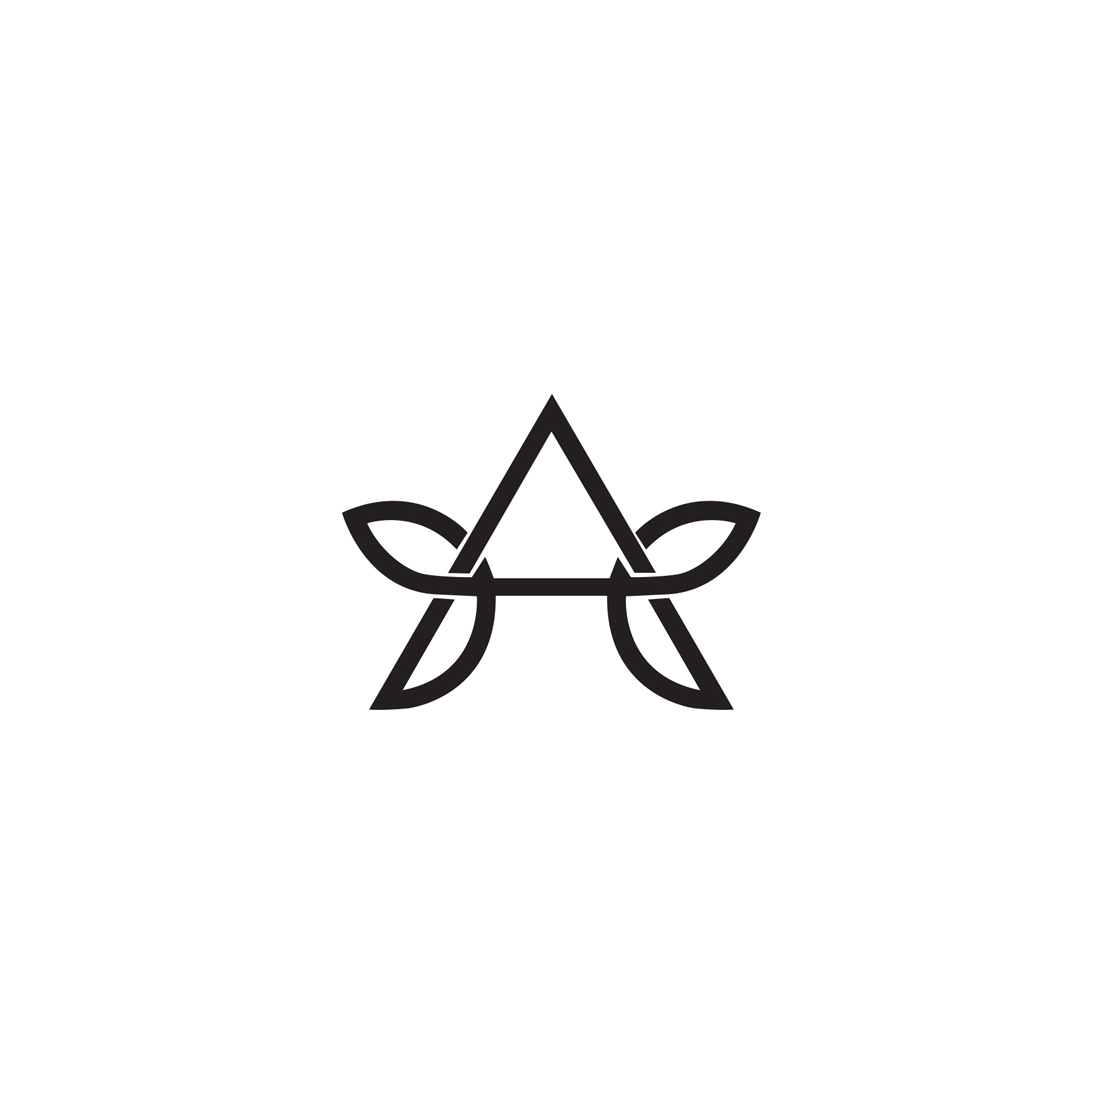 Black and white image of a letter a.